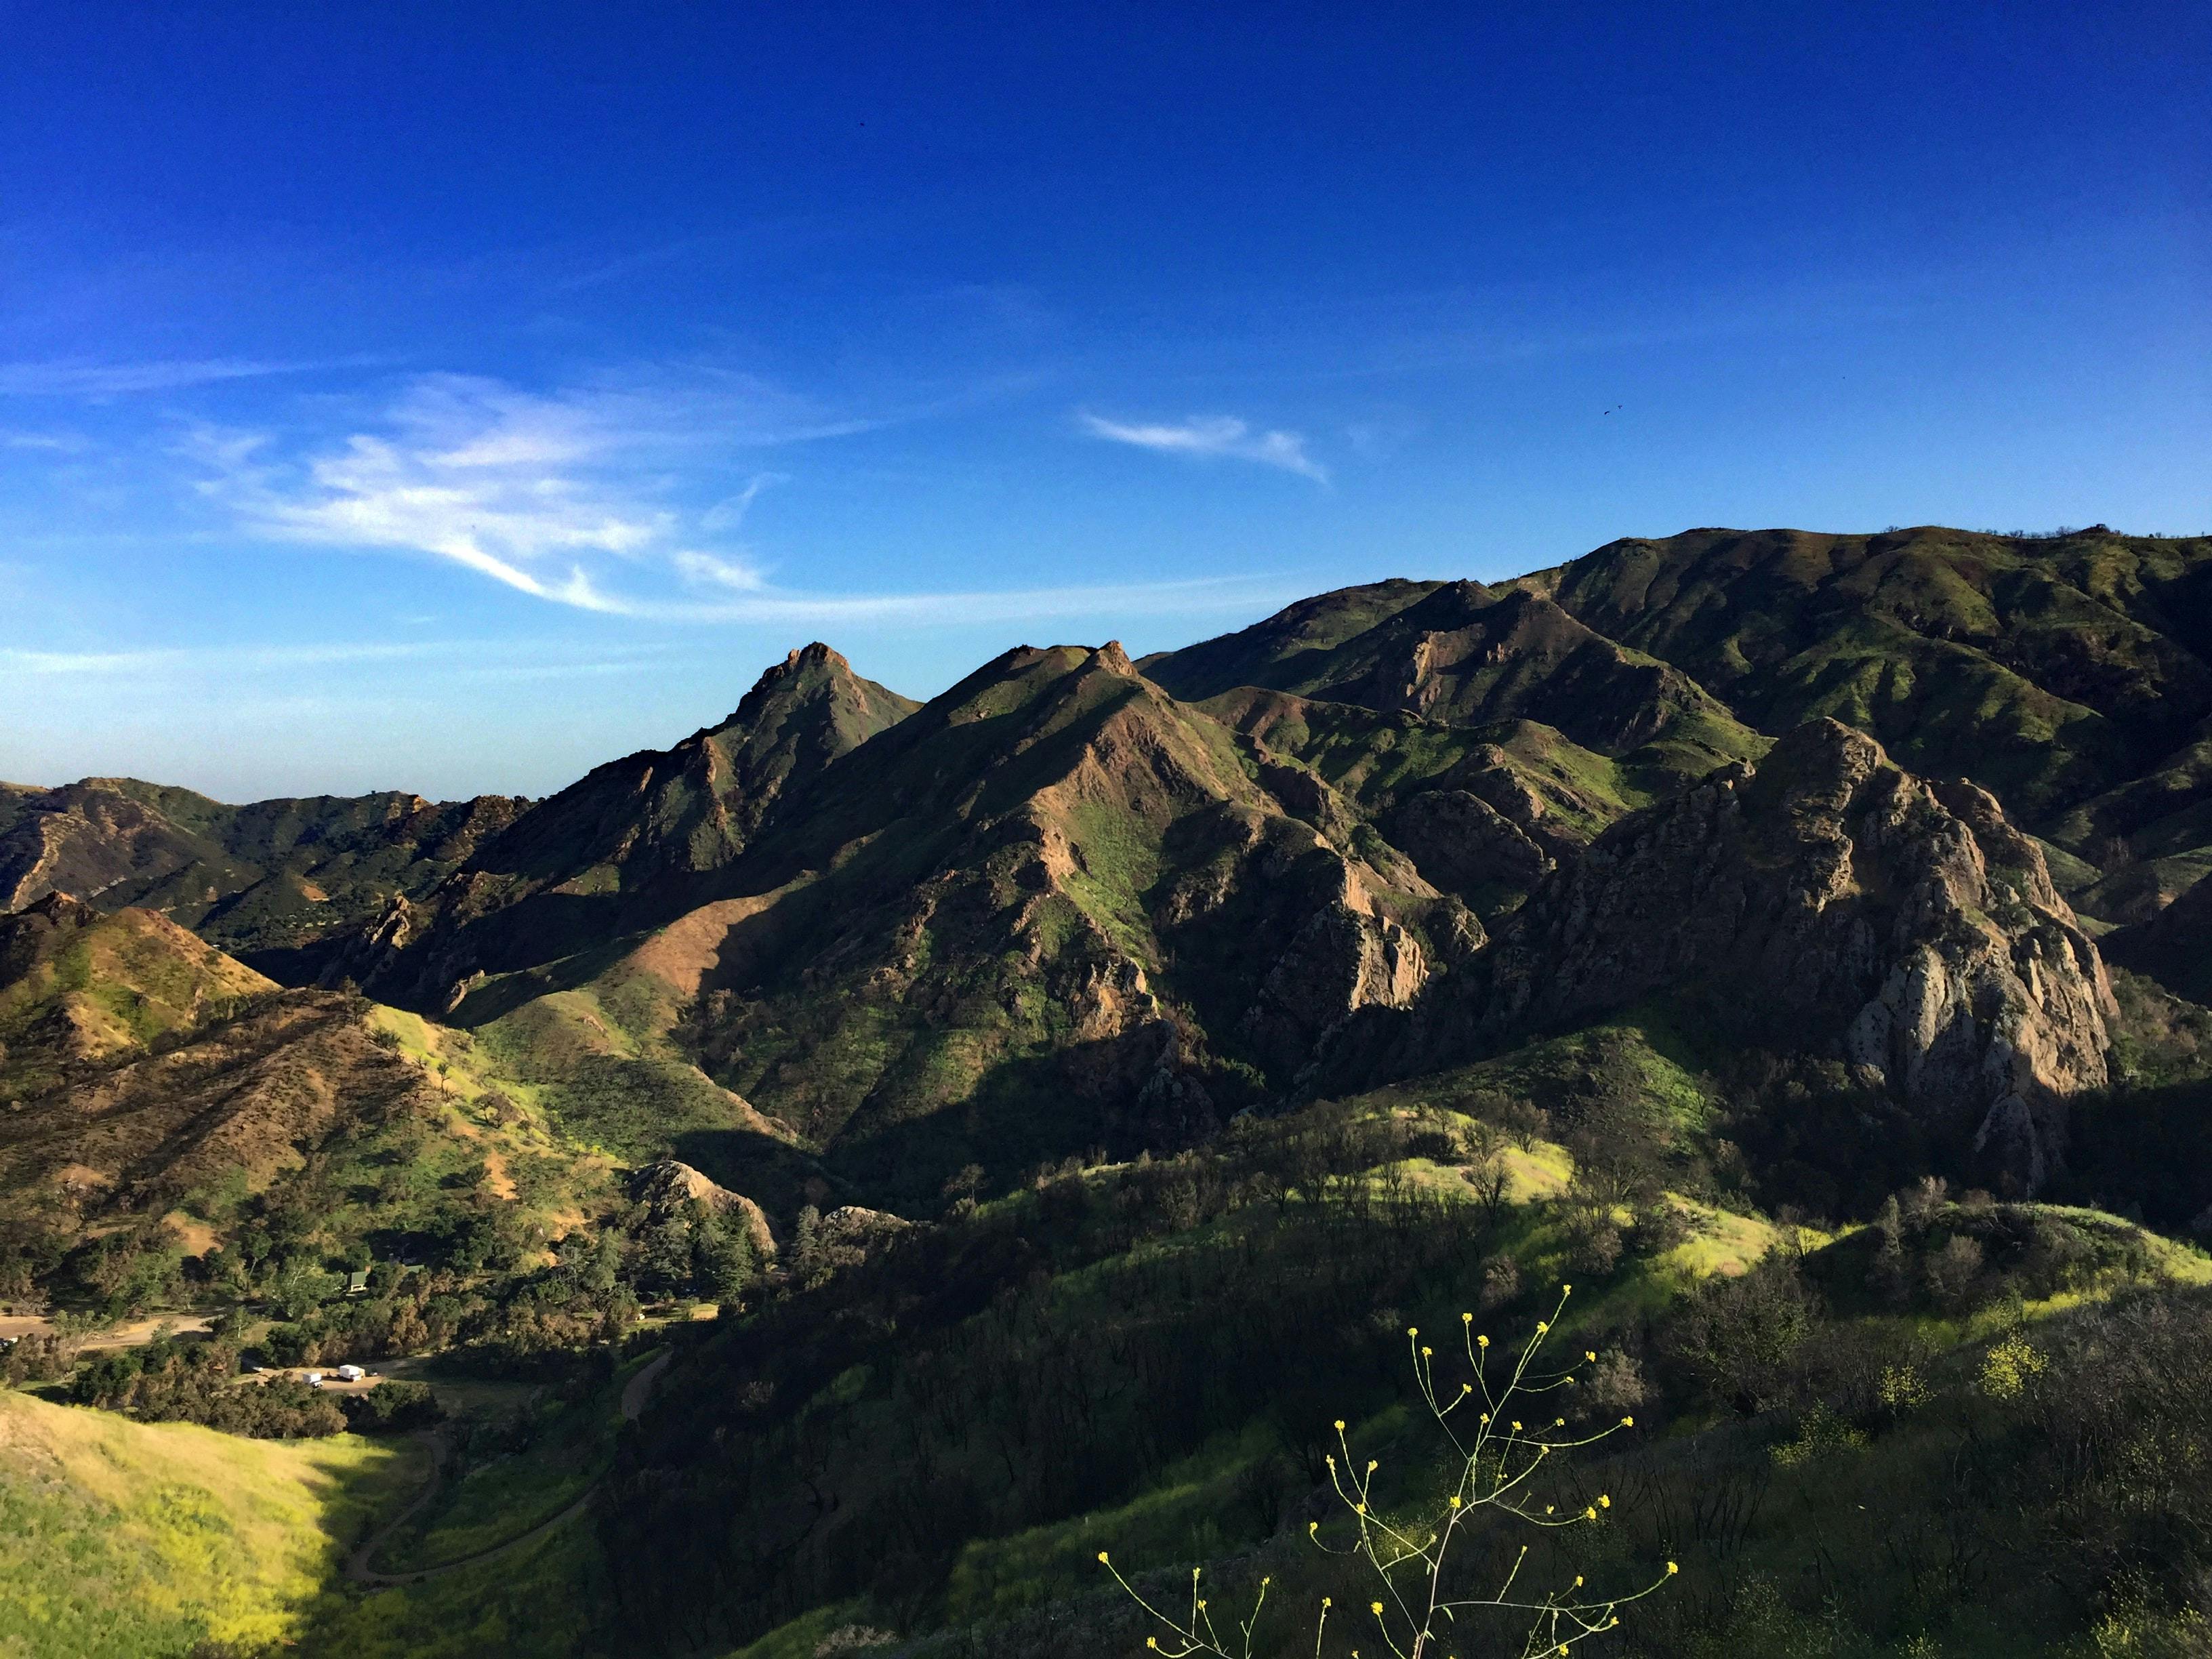 A photo of the Santa Monica Mountains. They are green and covered in brown scrub brush